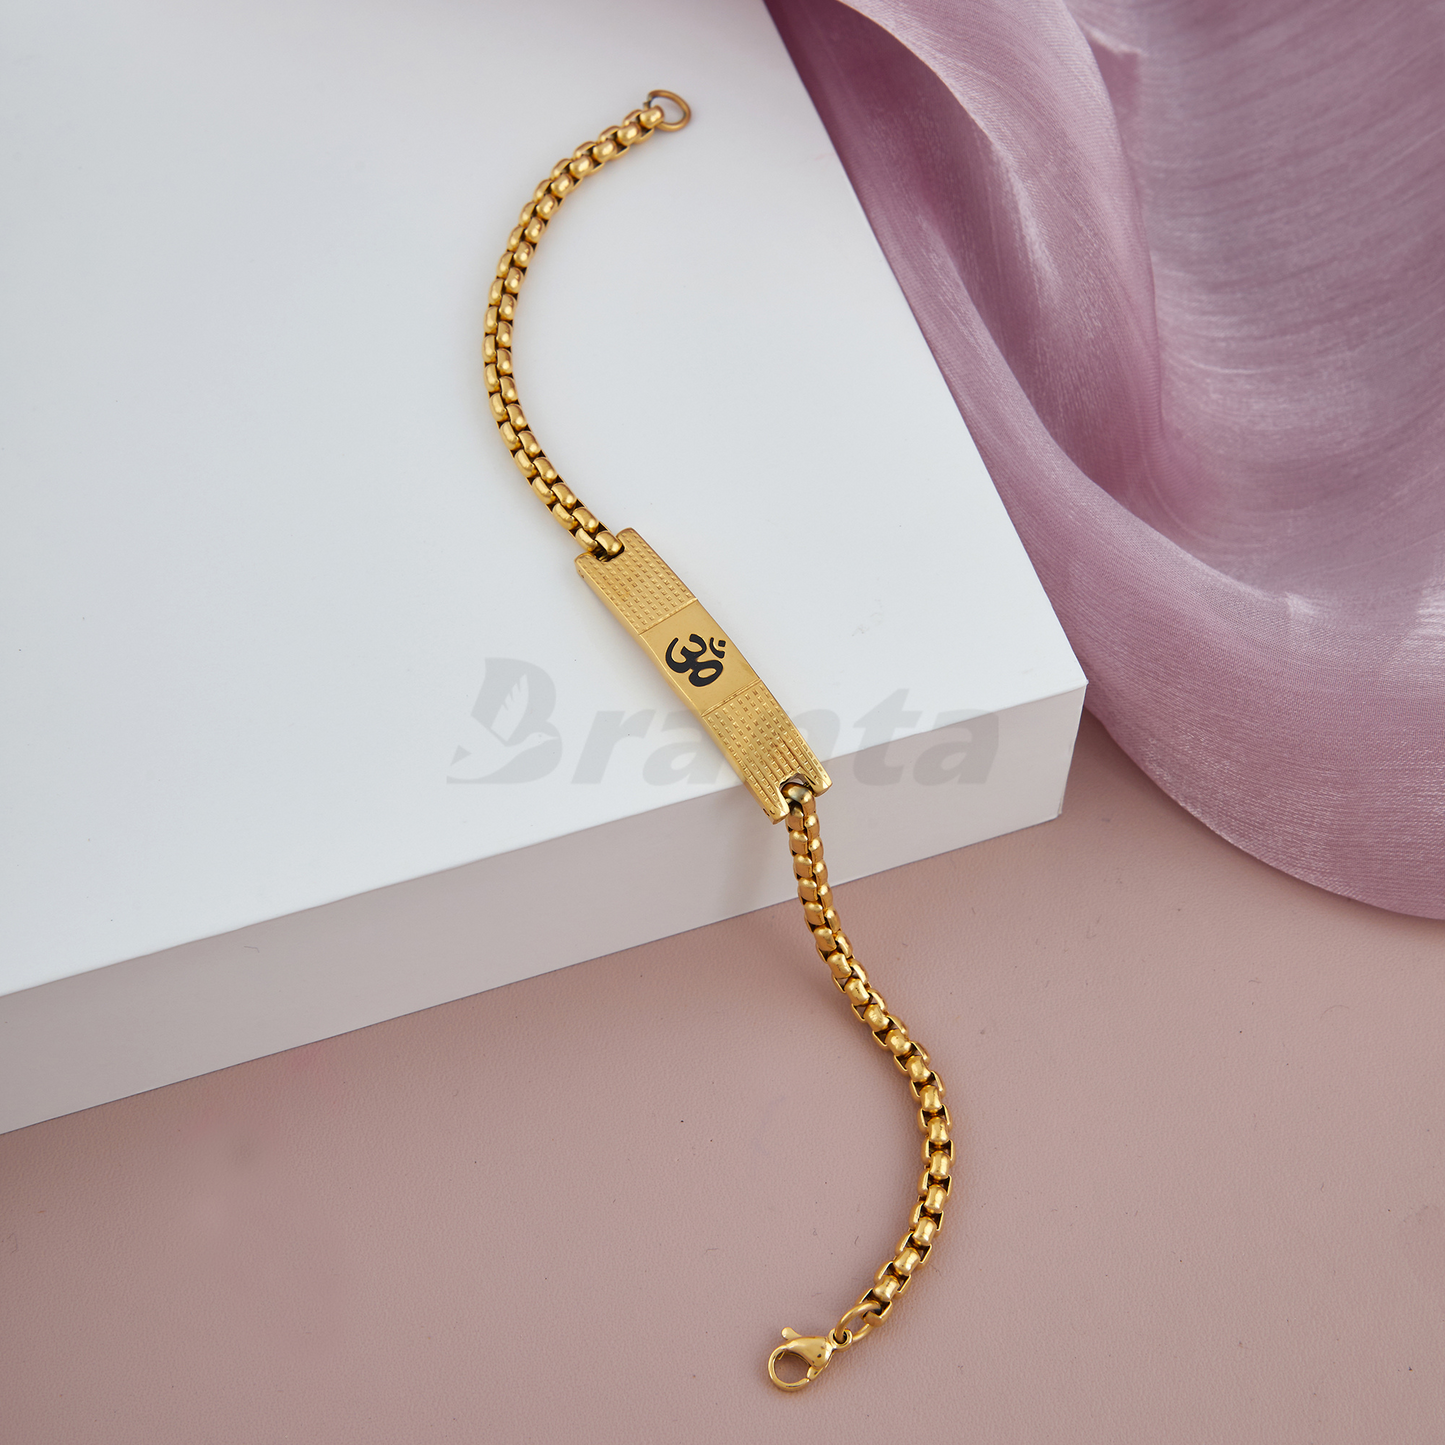 Premium Om Loose Gold Bracelet For Men With Dotted Pattern (8 Inch)